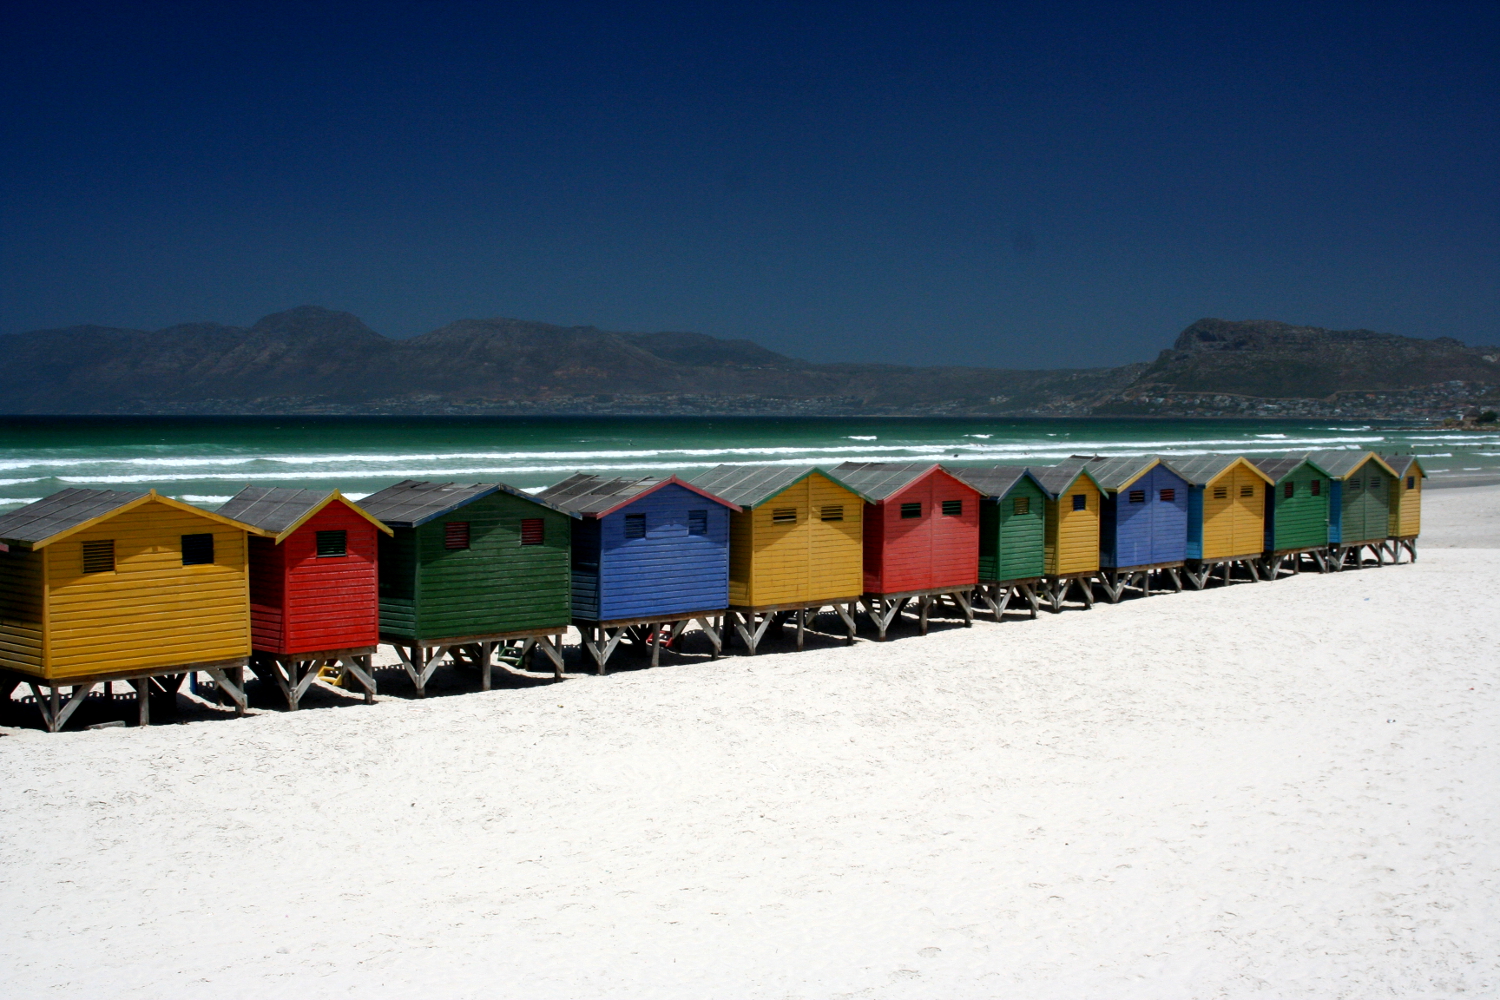 Beach huts at Muizenberg beach, Cape Town. Image by Simon Richmond / Lonely Planet